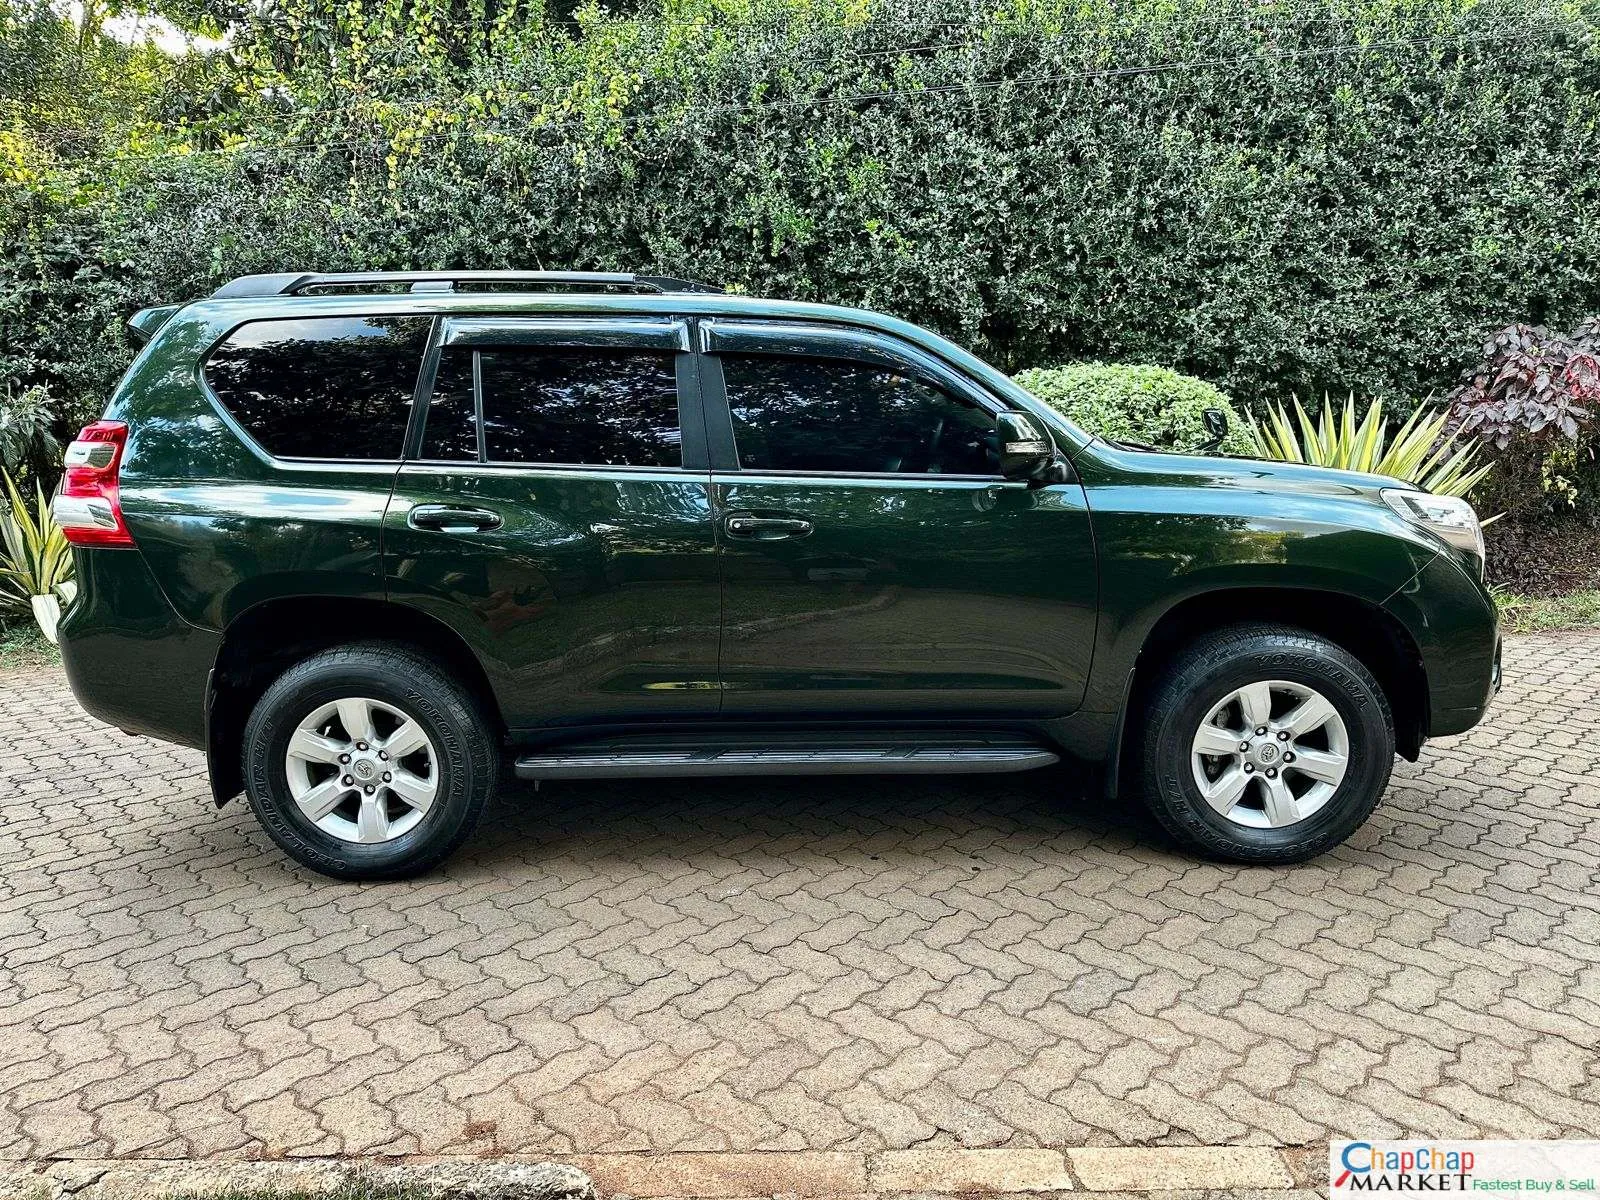 Cars Cars For Sale-Toyota PRADO for sale in Kenya Sunroof Quick SALE TRADE IN OK EXCLUSIVE! Hire purchase installments